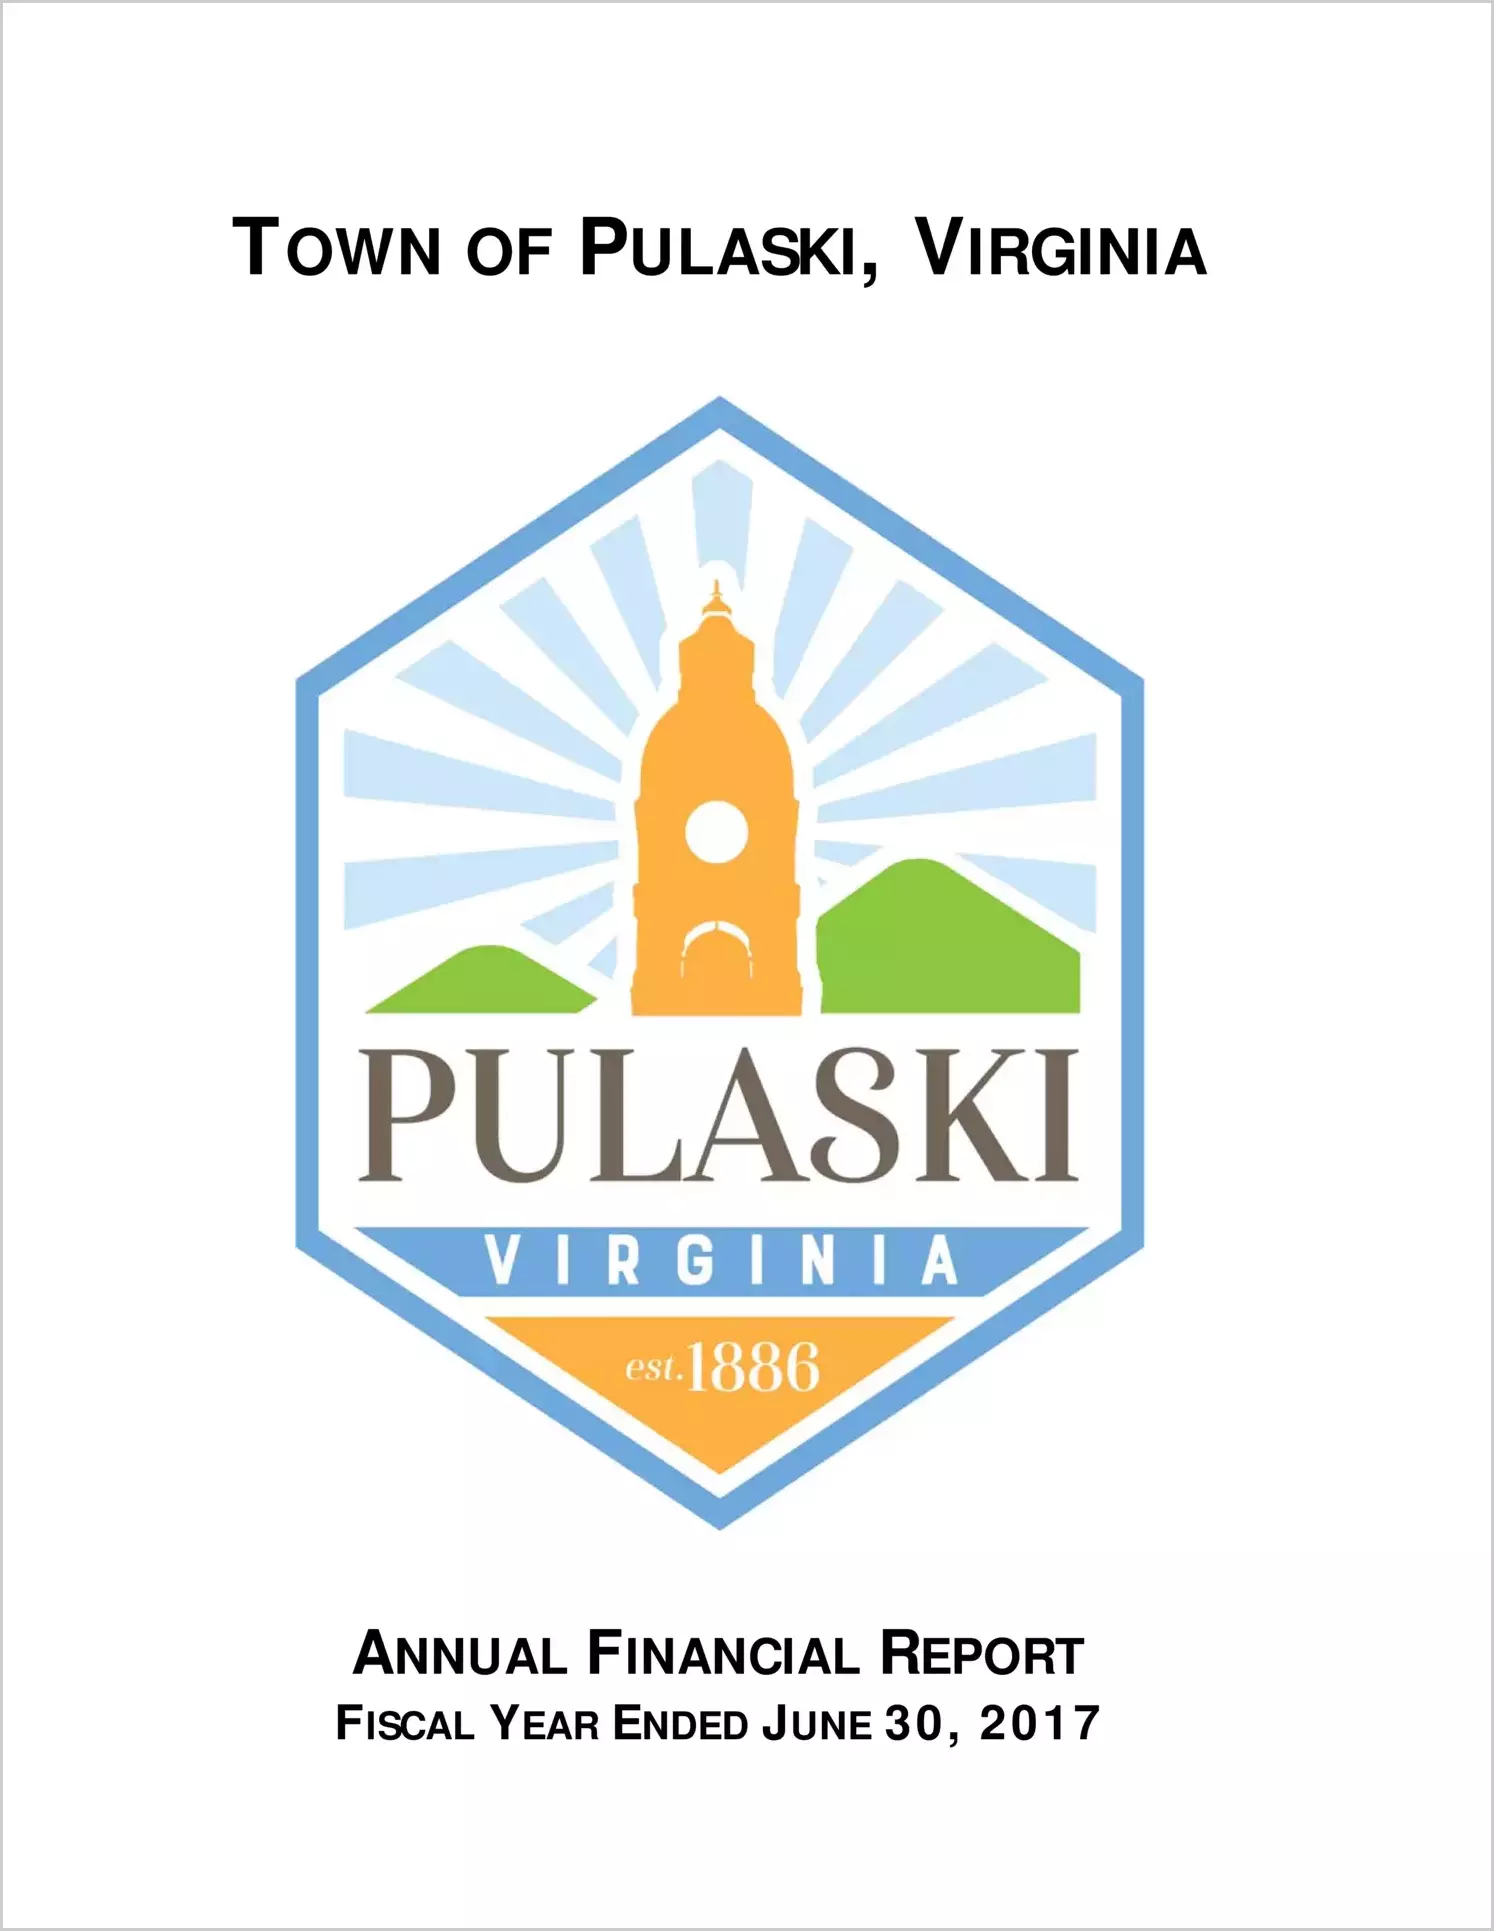 2017 Annual Financial Report for Town of Pulaski